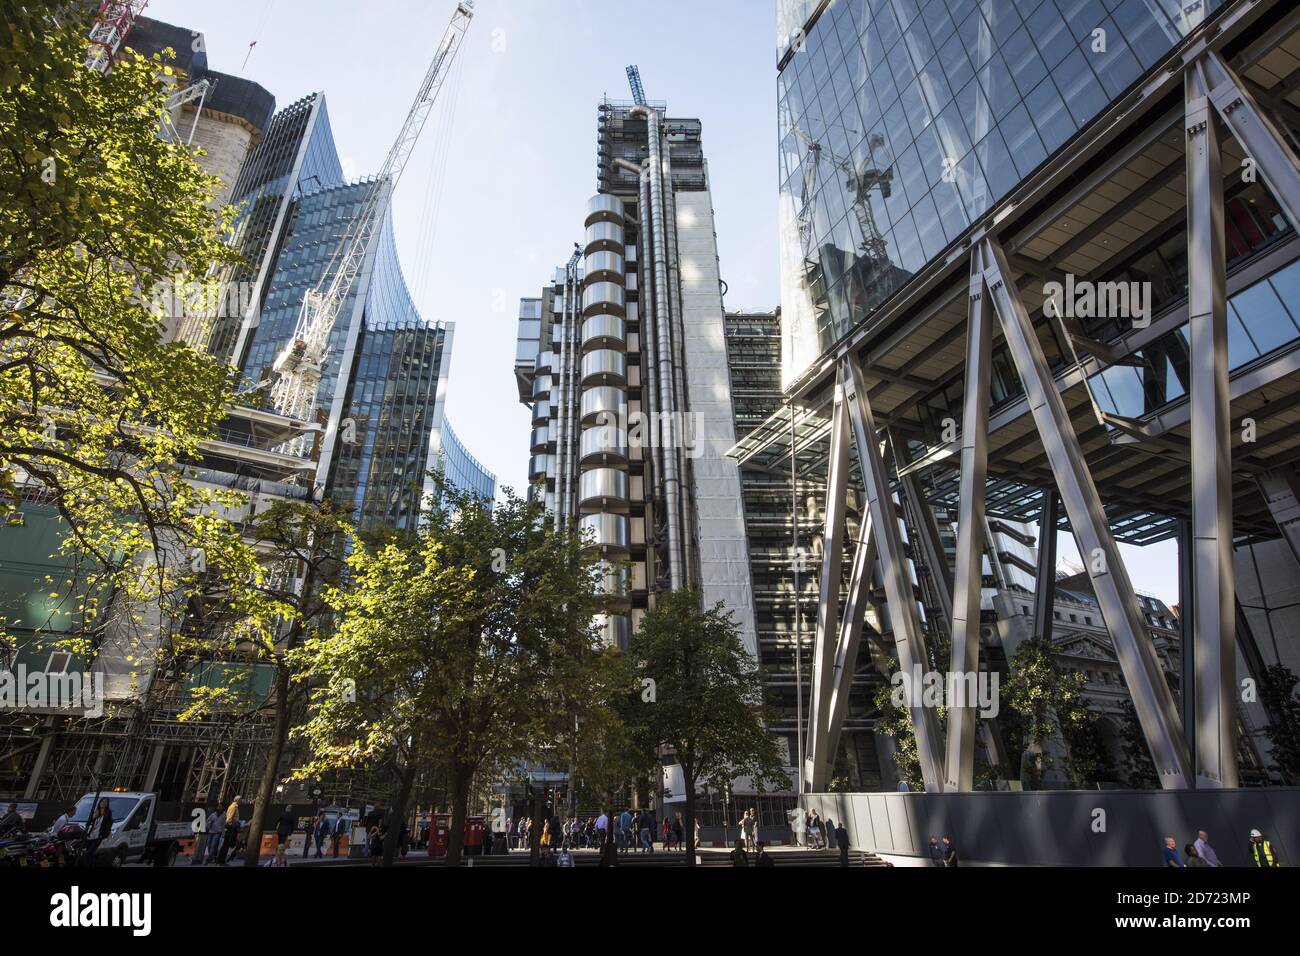 General view of the Lloyds Building in the City of London. September 30th will mark 100 days since the UK voted to leave the EU, prompting the insurance firm to make plans to open a subsidiary abroad to allow it to continue trading across Europe. Stock Photo